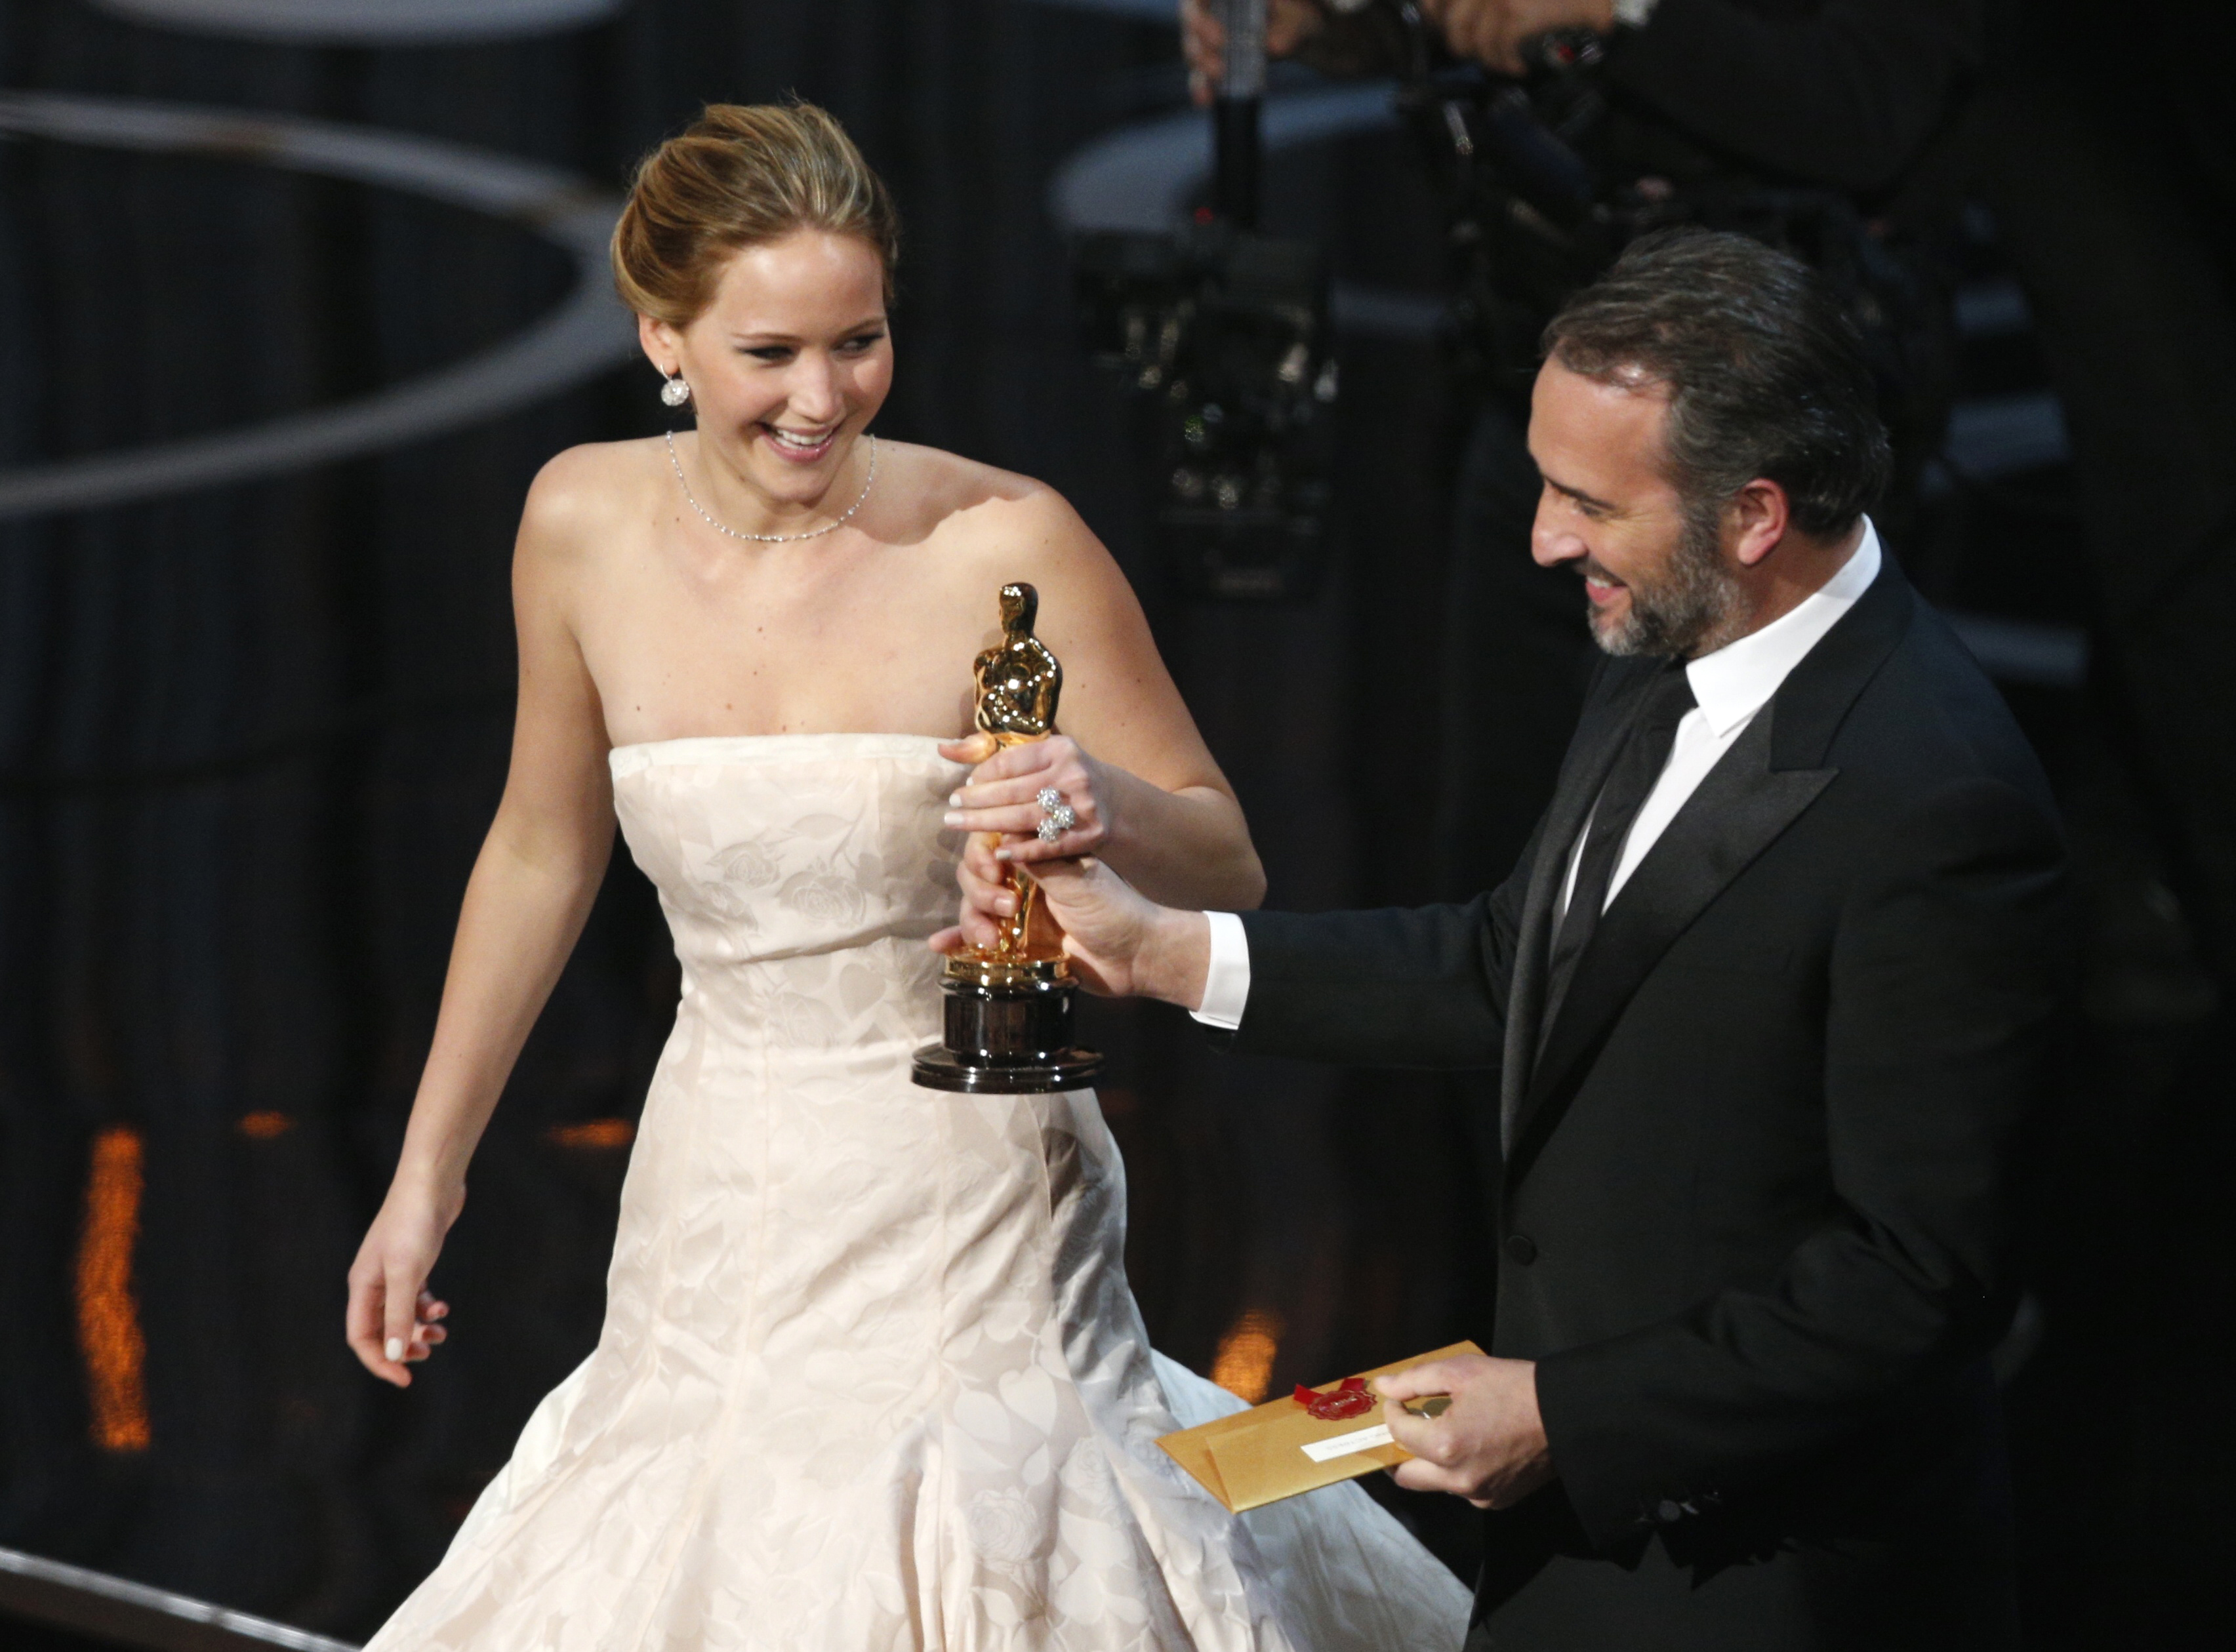 Jennifer Lawrence accepts the award for Best Actress for her role in Silver Linings Playbook from presenter Jean Dujardin at the 85th Academy Awards on Feb. 24, 2013 in Los Angeles.